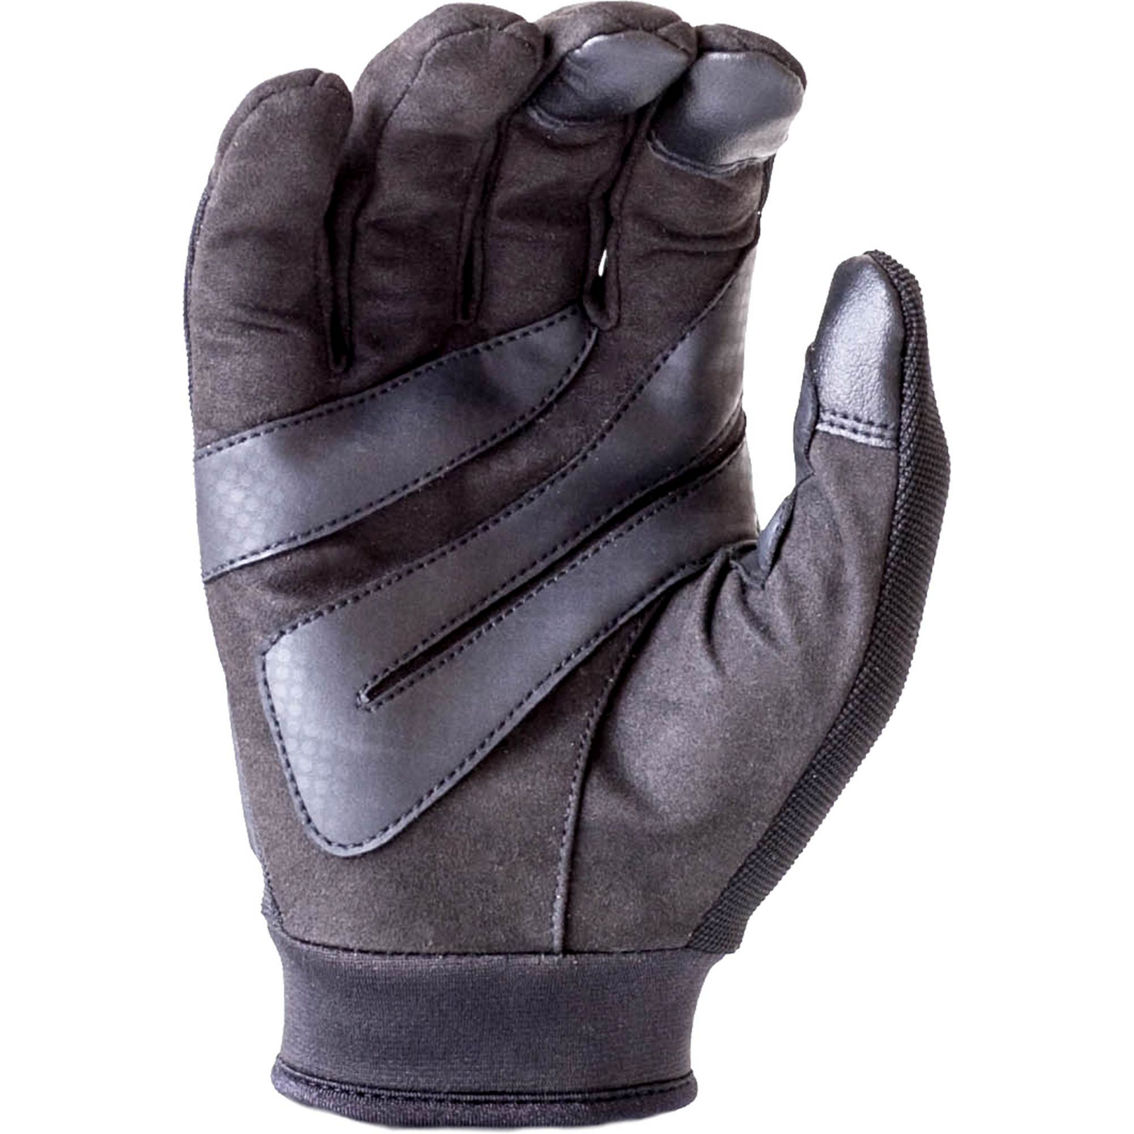 HWI Tac-Tex Tactical Touchscreen Mechanic Gloves - Image 2 of 2